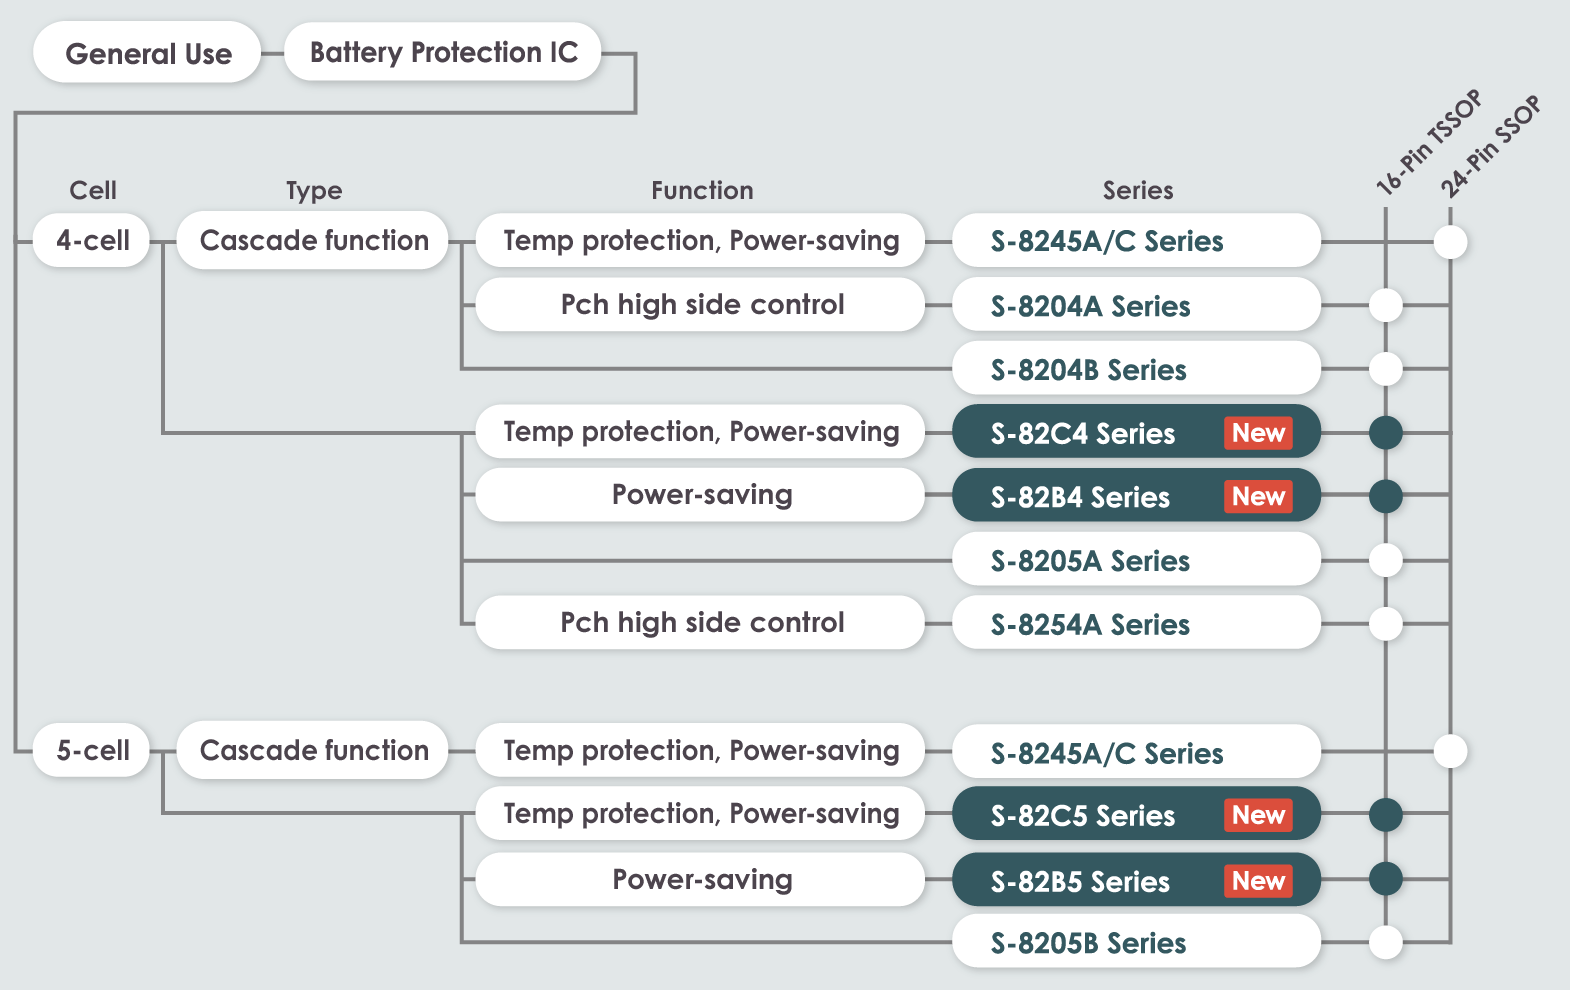 4 / 5-cell battery protection IC lineup